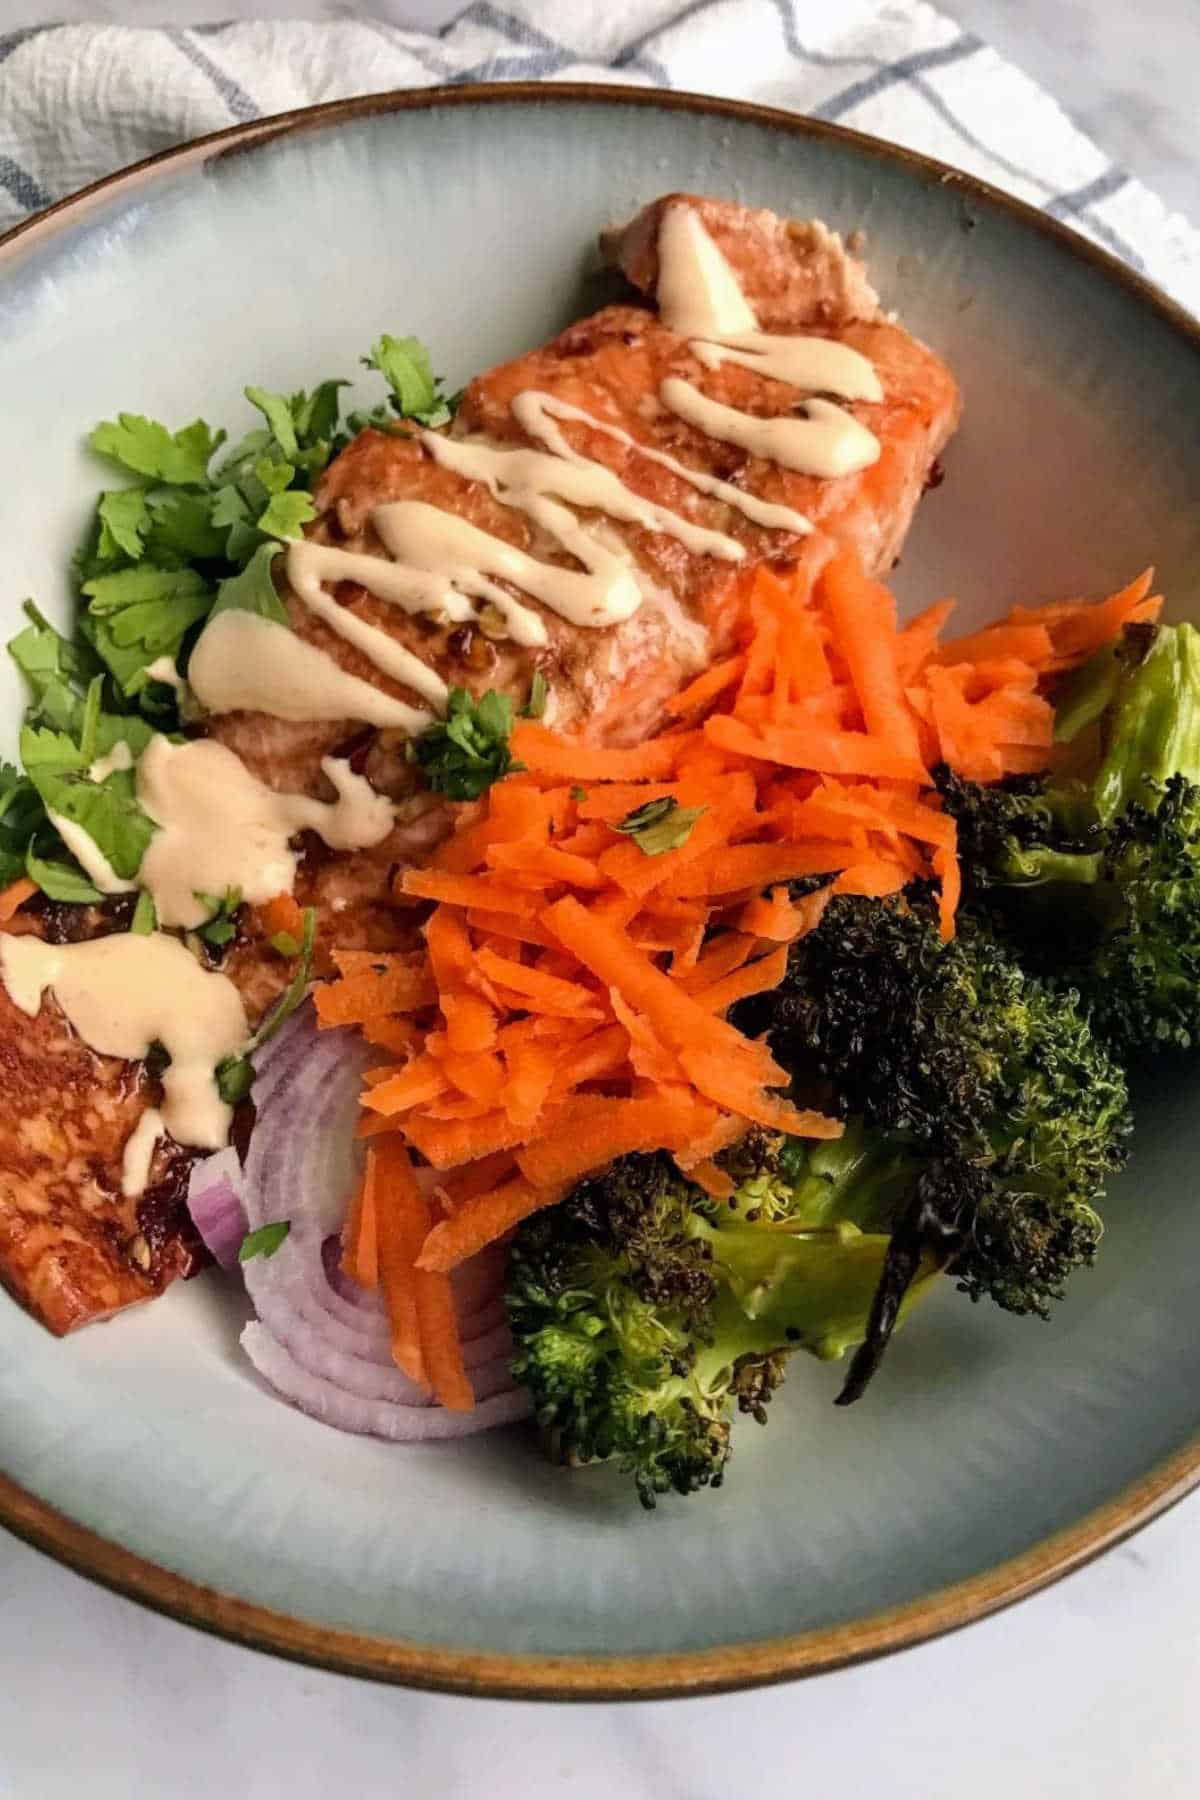 Grated carrot, broccoli, sliced red onion, salmon, and coriander leaves in a bowl.